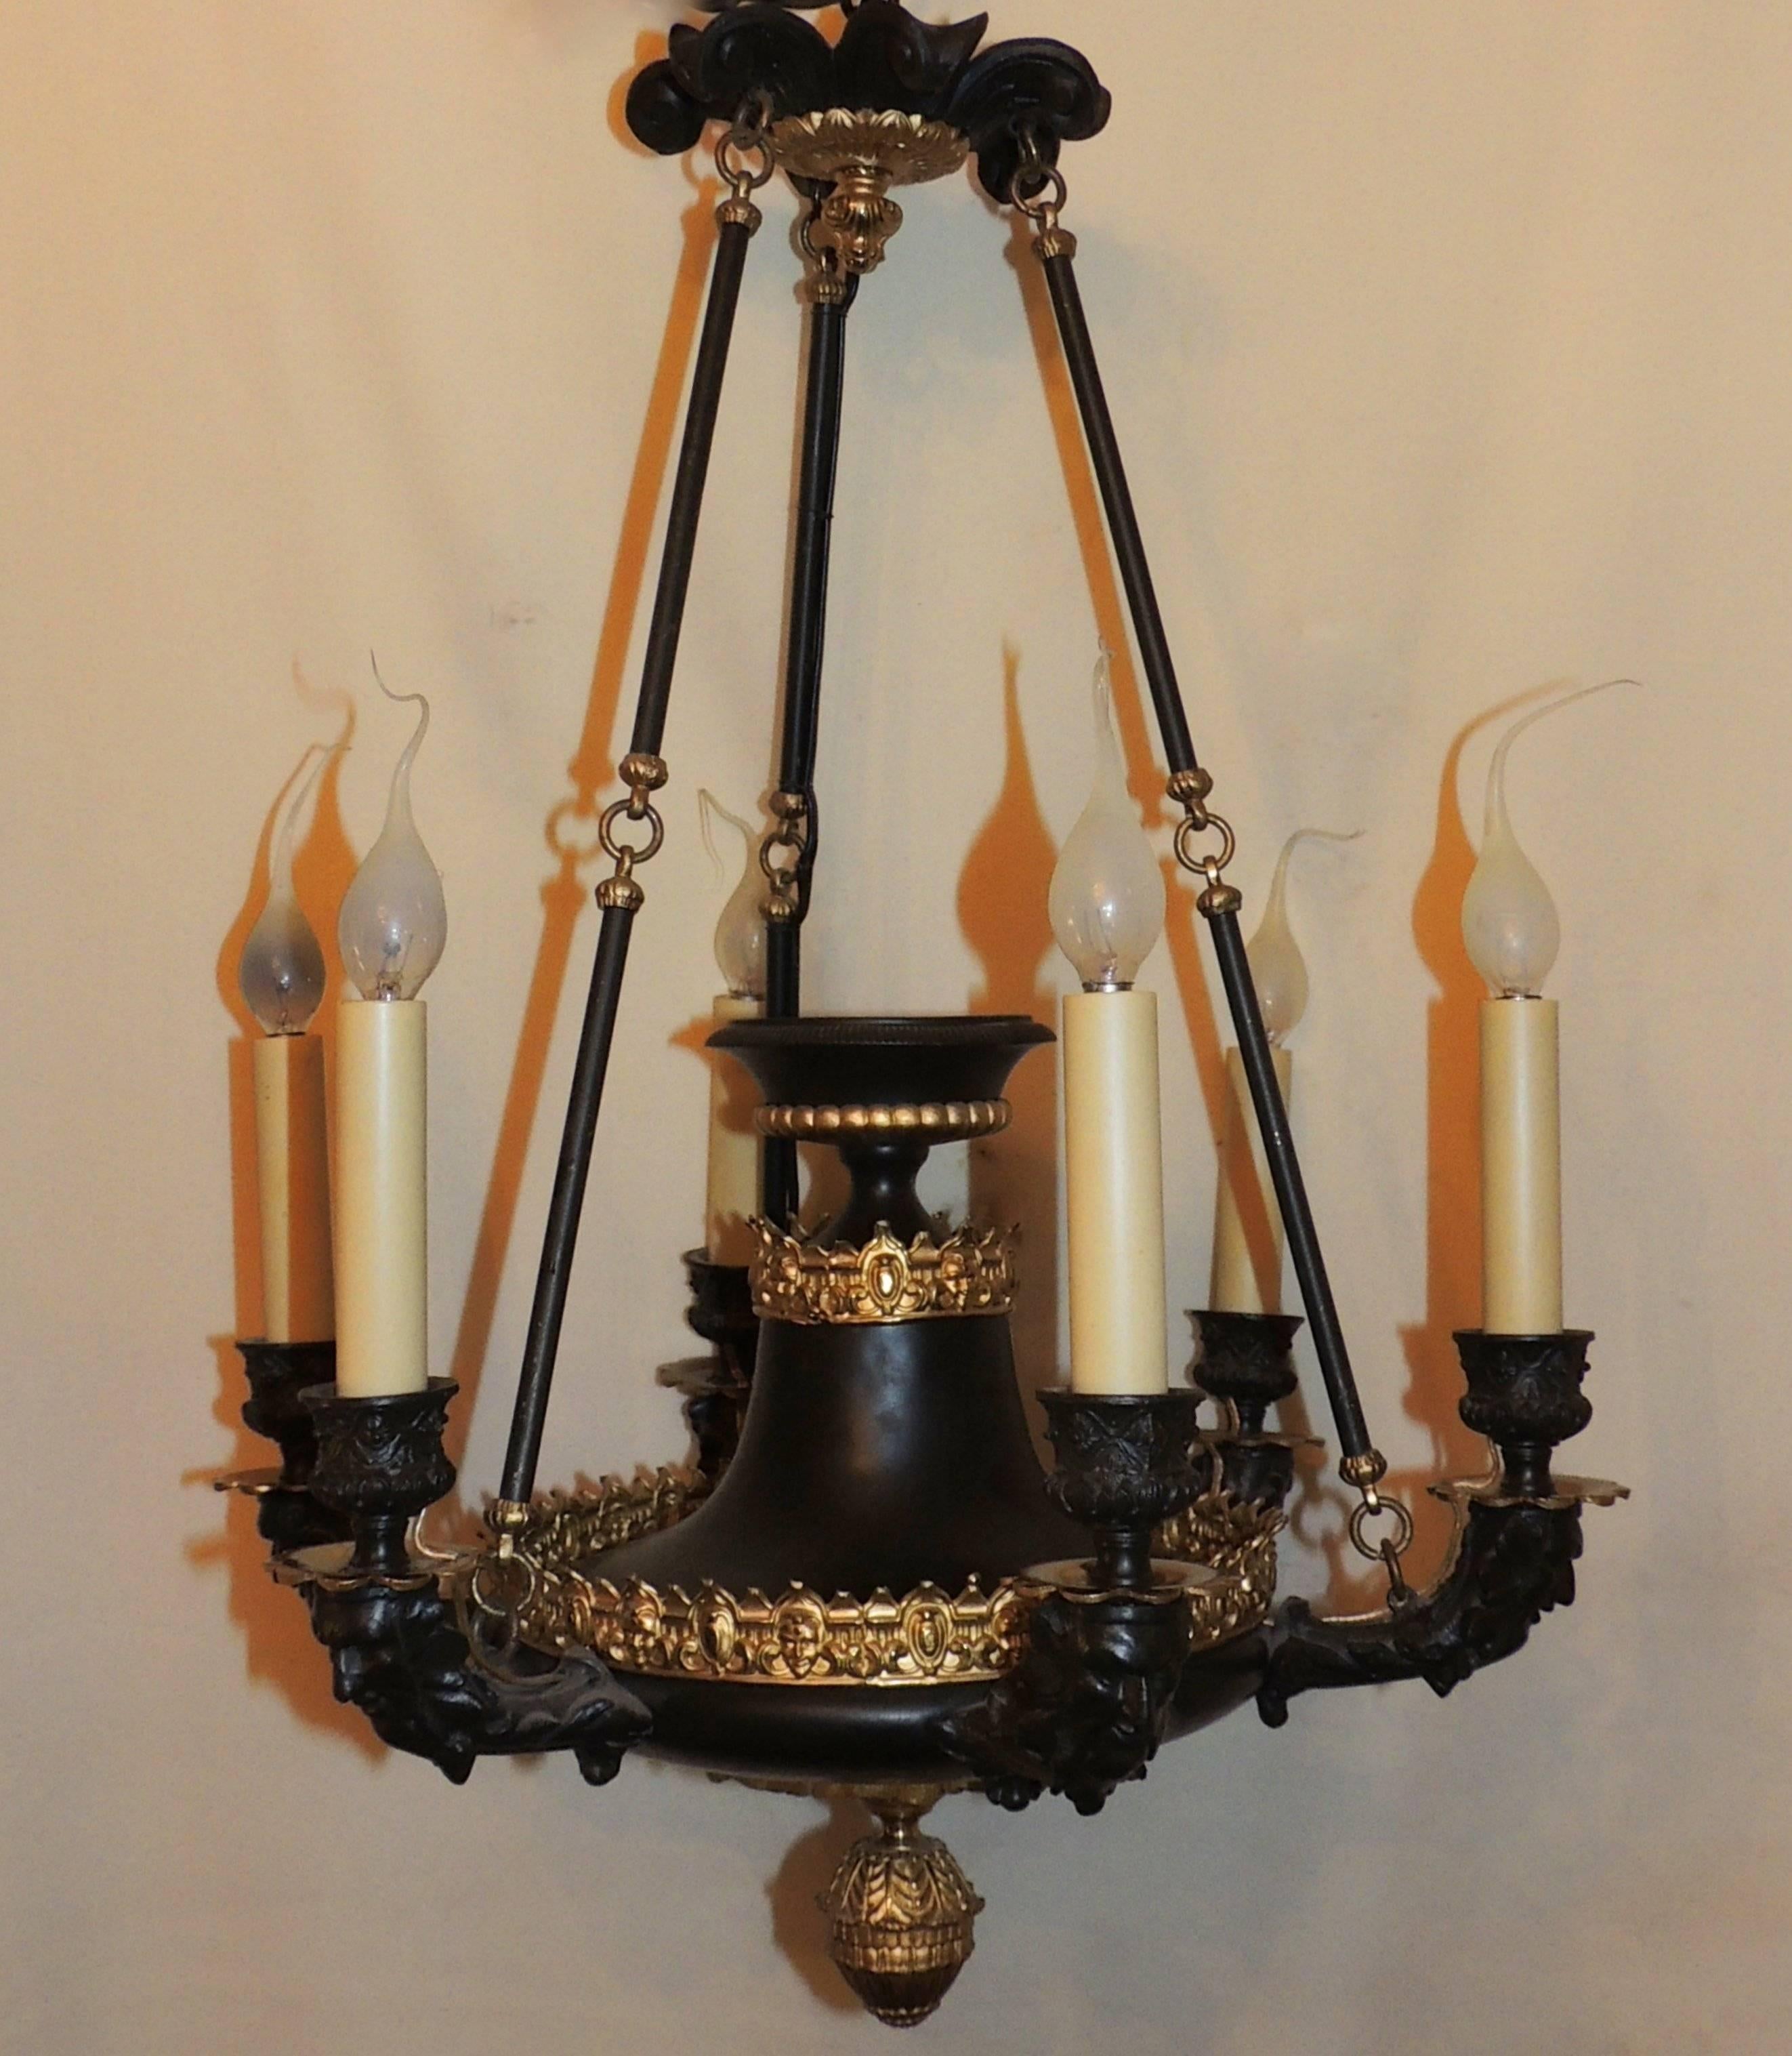 A fine French empire patinated and gilt bronze figural neoclassical Regency urn center chandelier.

Measures:  20." H x 16" W